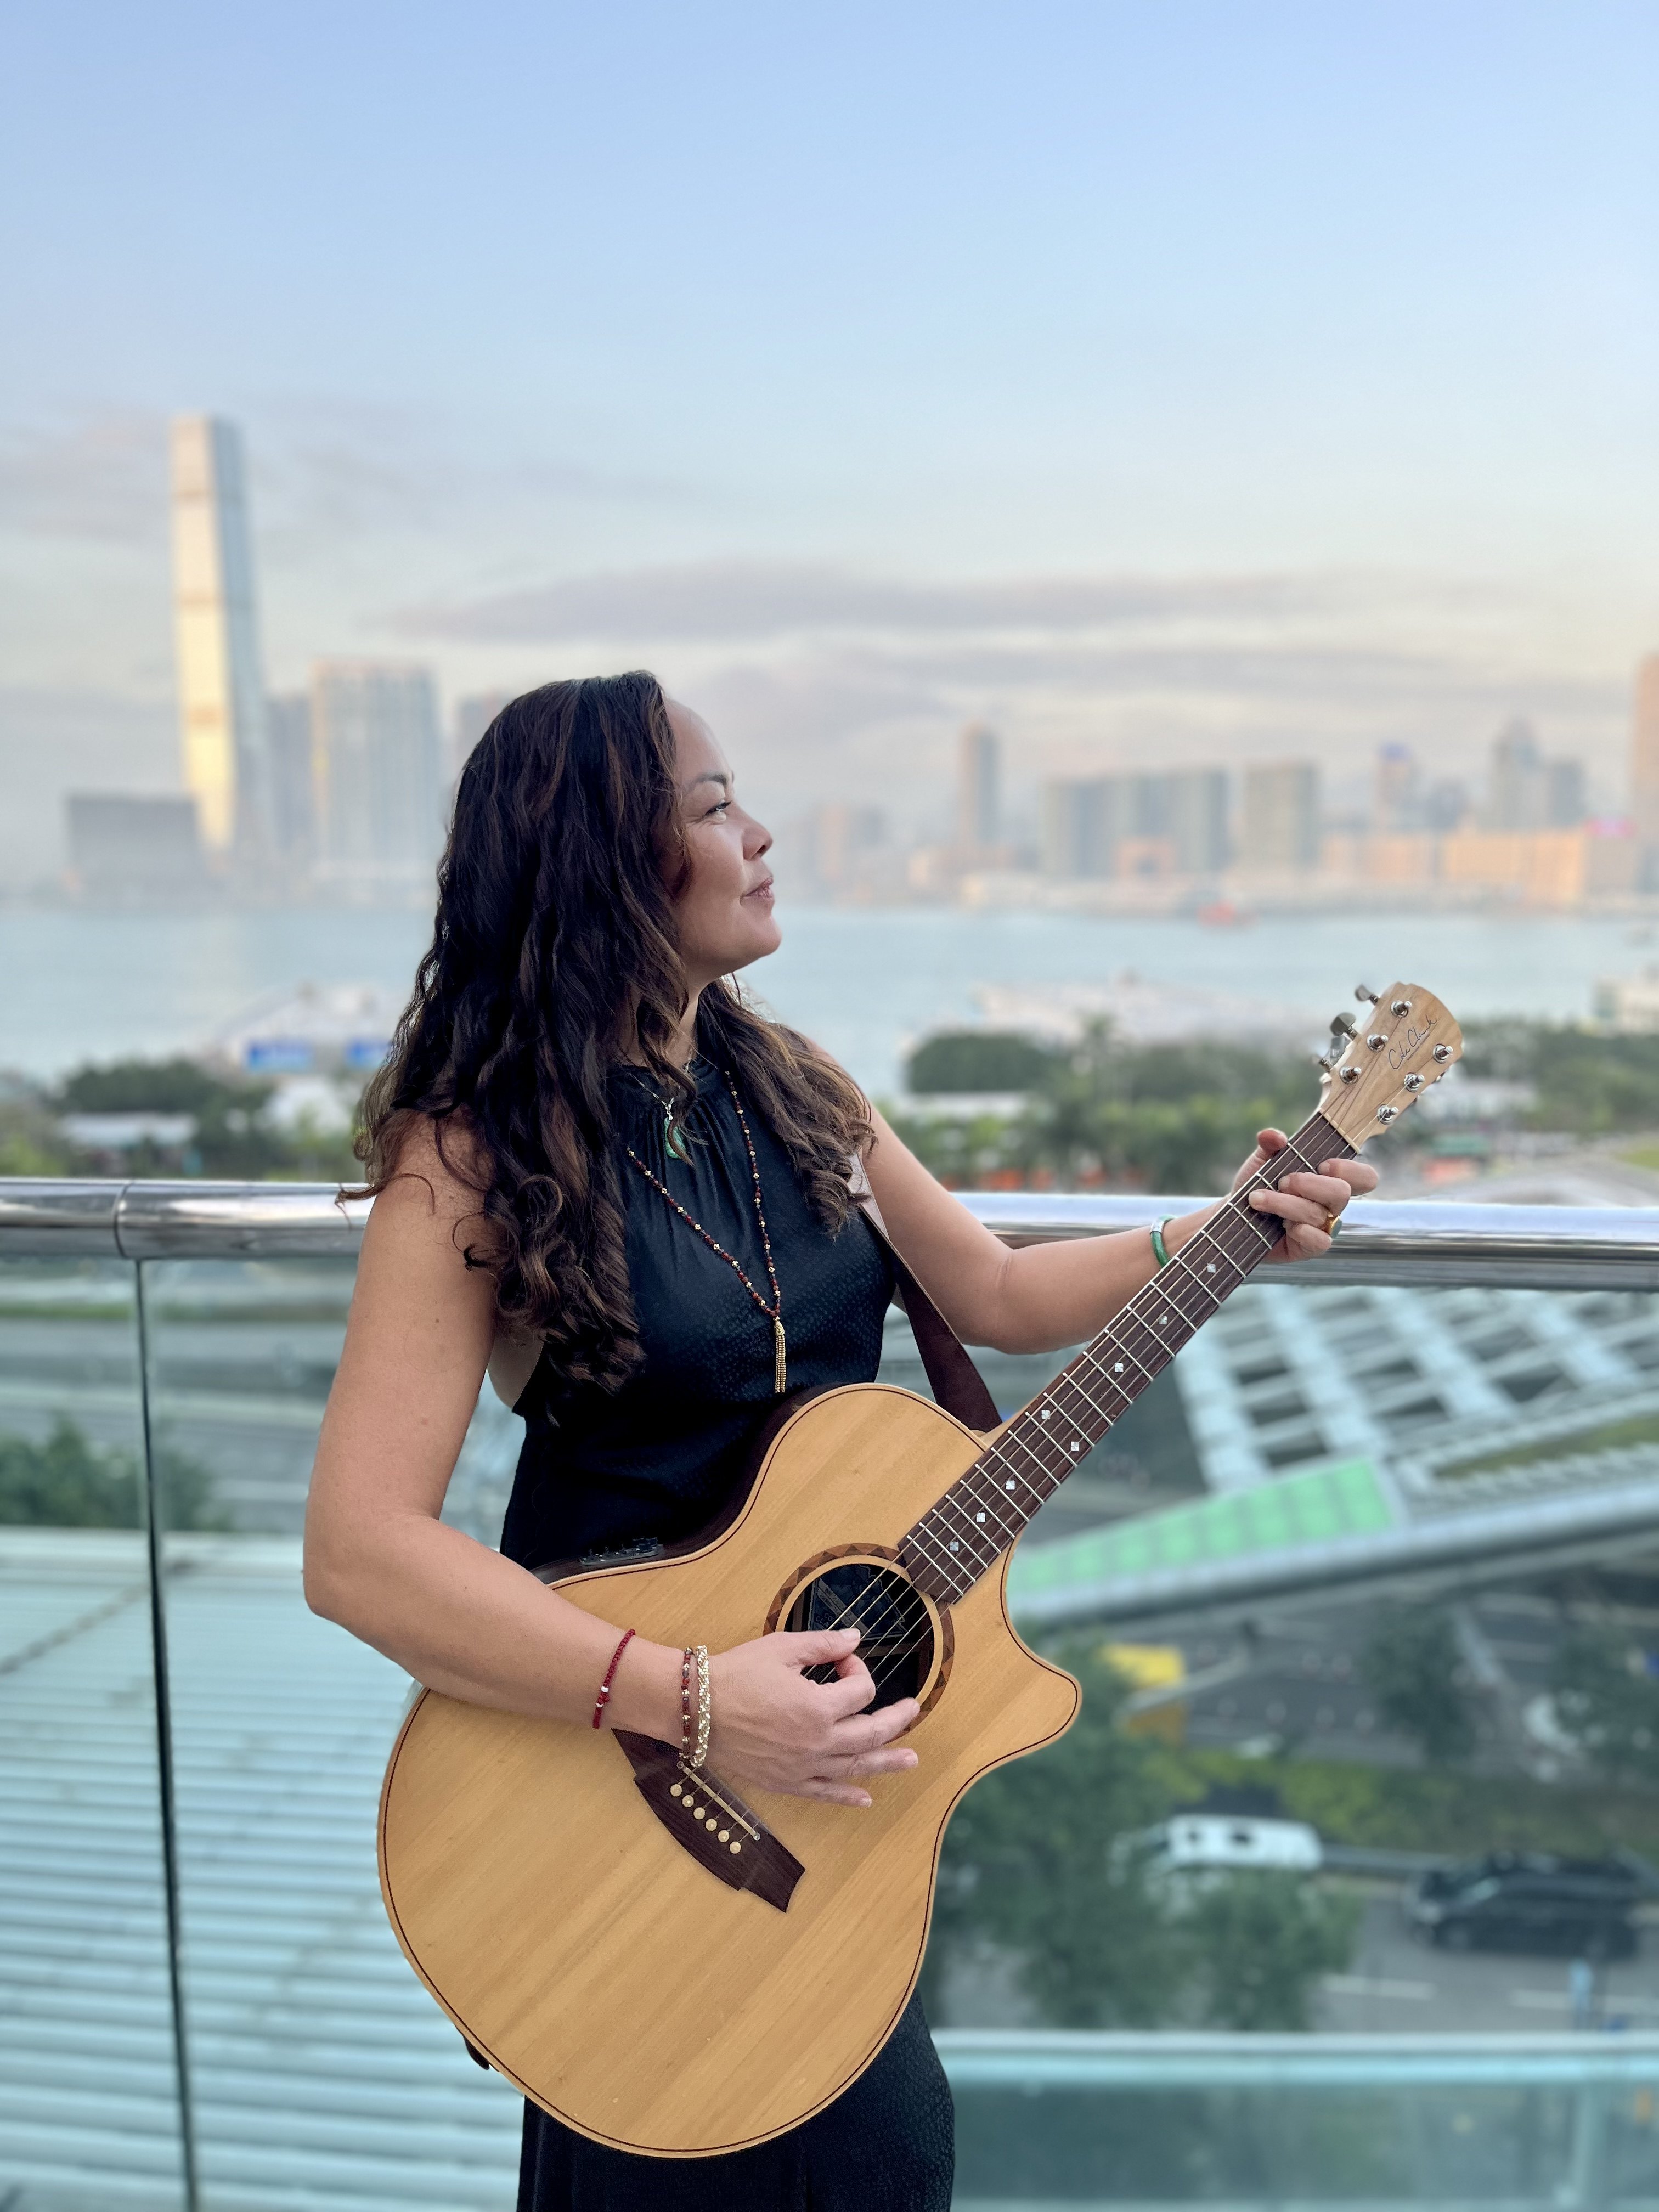 New-ge artist Daphne Tse brings her healing music for yoga, dance, chant and meditation to Hong Kong his month. Photo: Kylie Knott